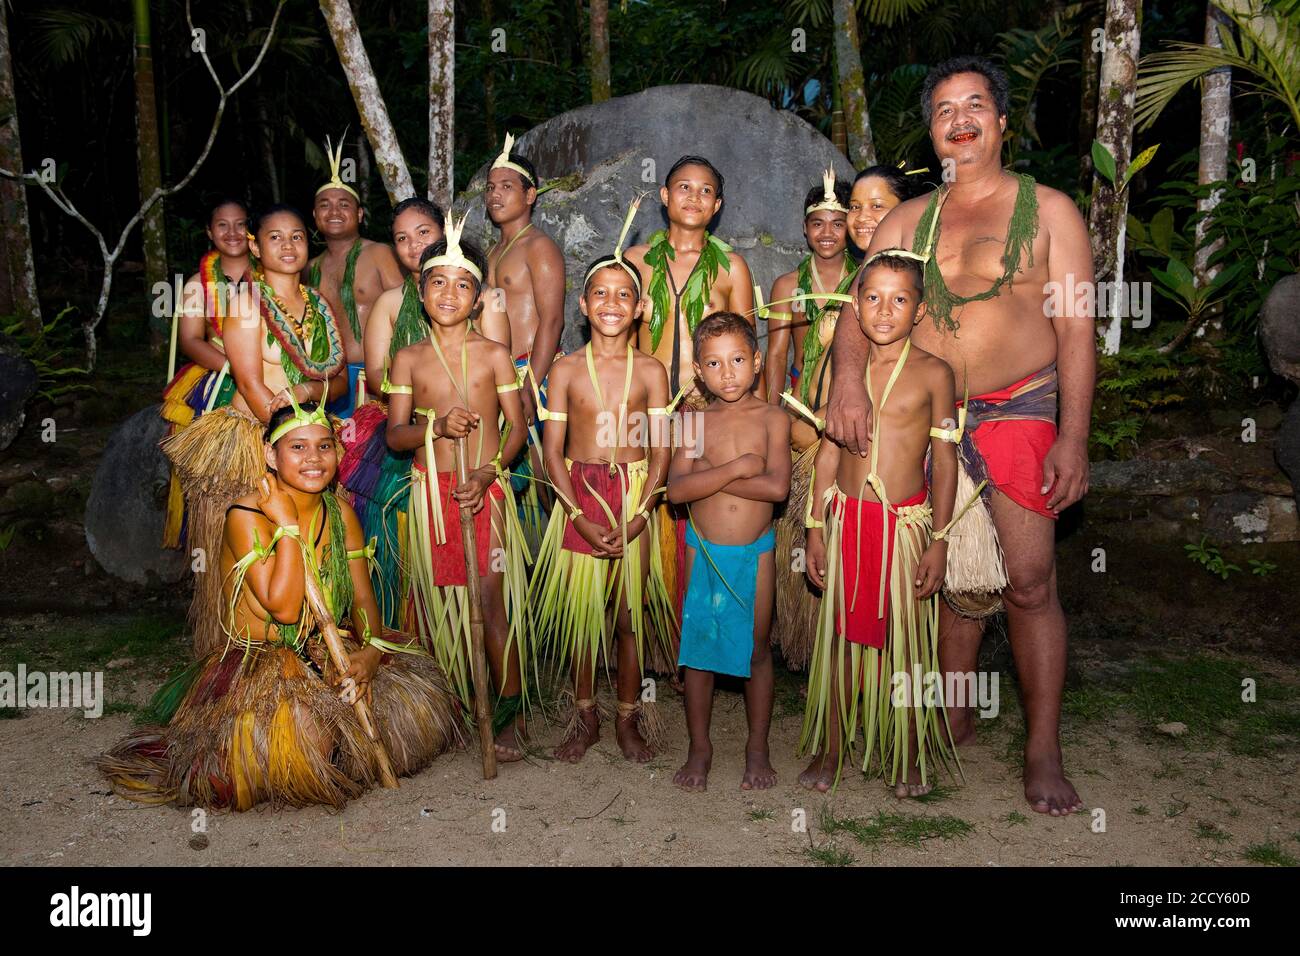 Group of natives on Yap in traditional dress, Yap Island, Micronesia Stock Photo